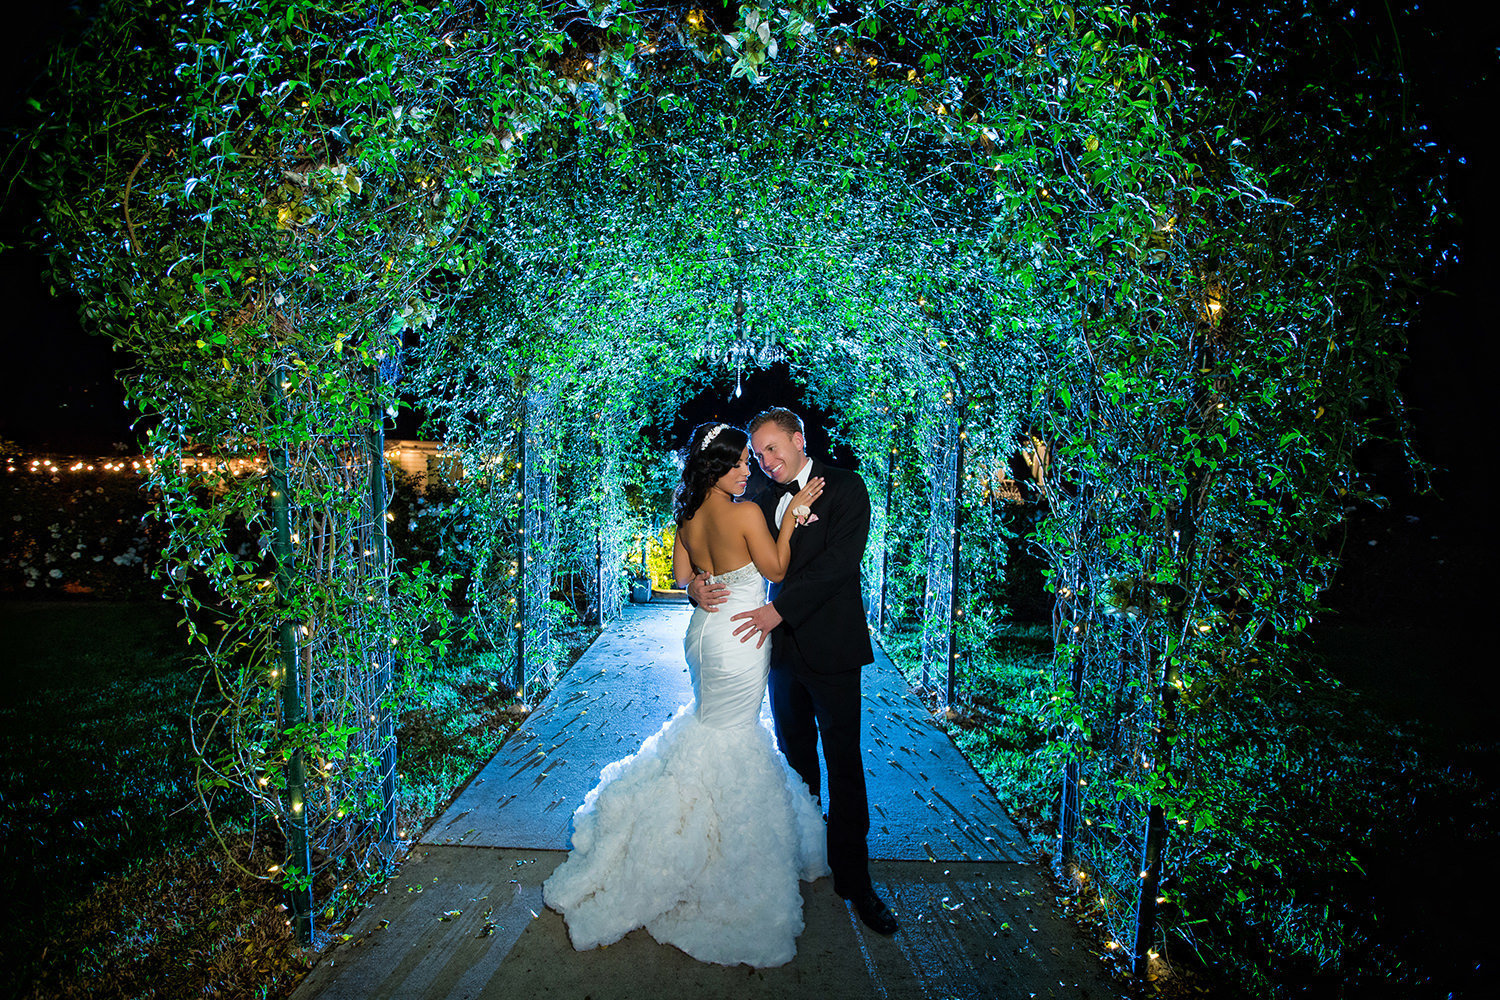 Incredible wedding portrait taken at night with ivy